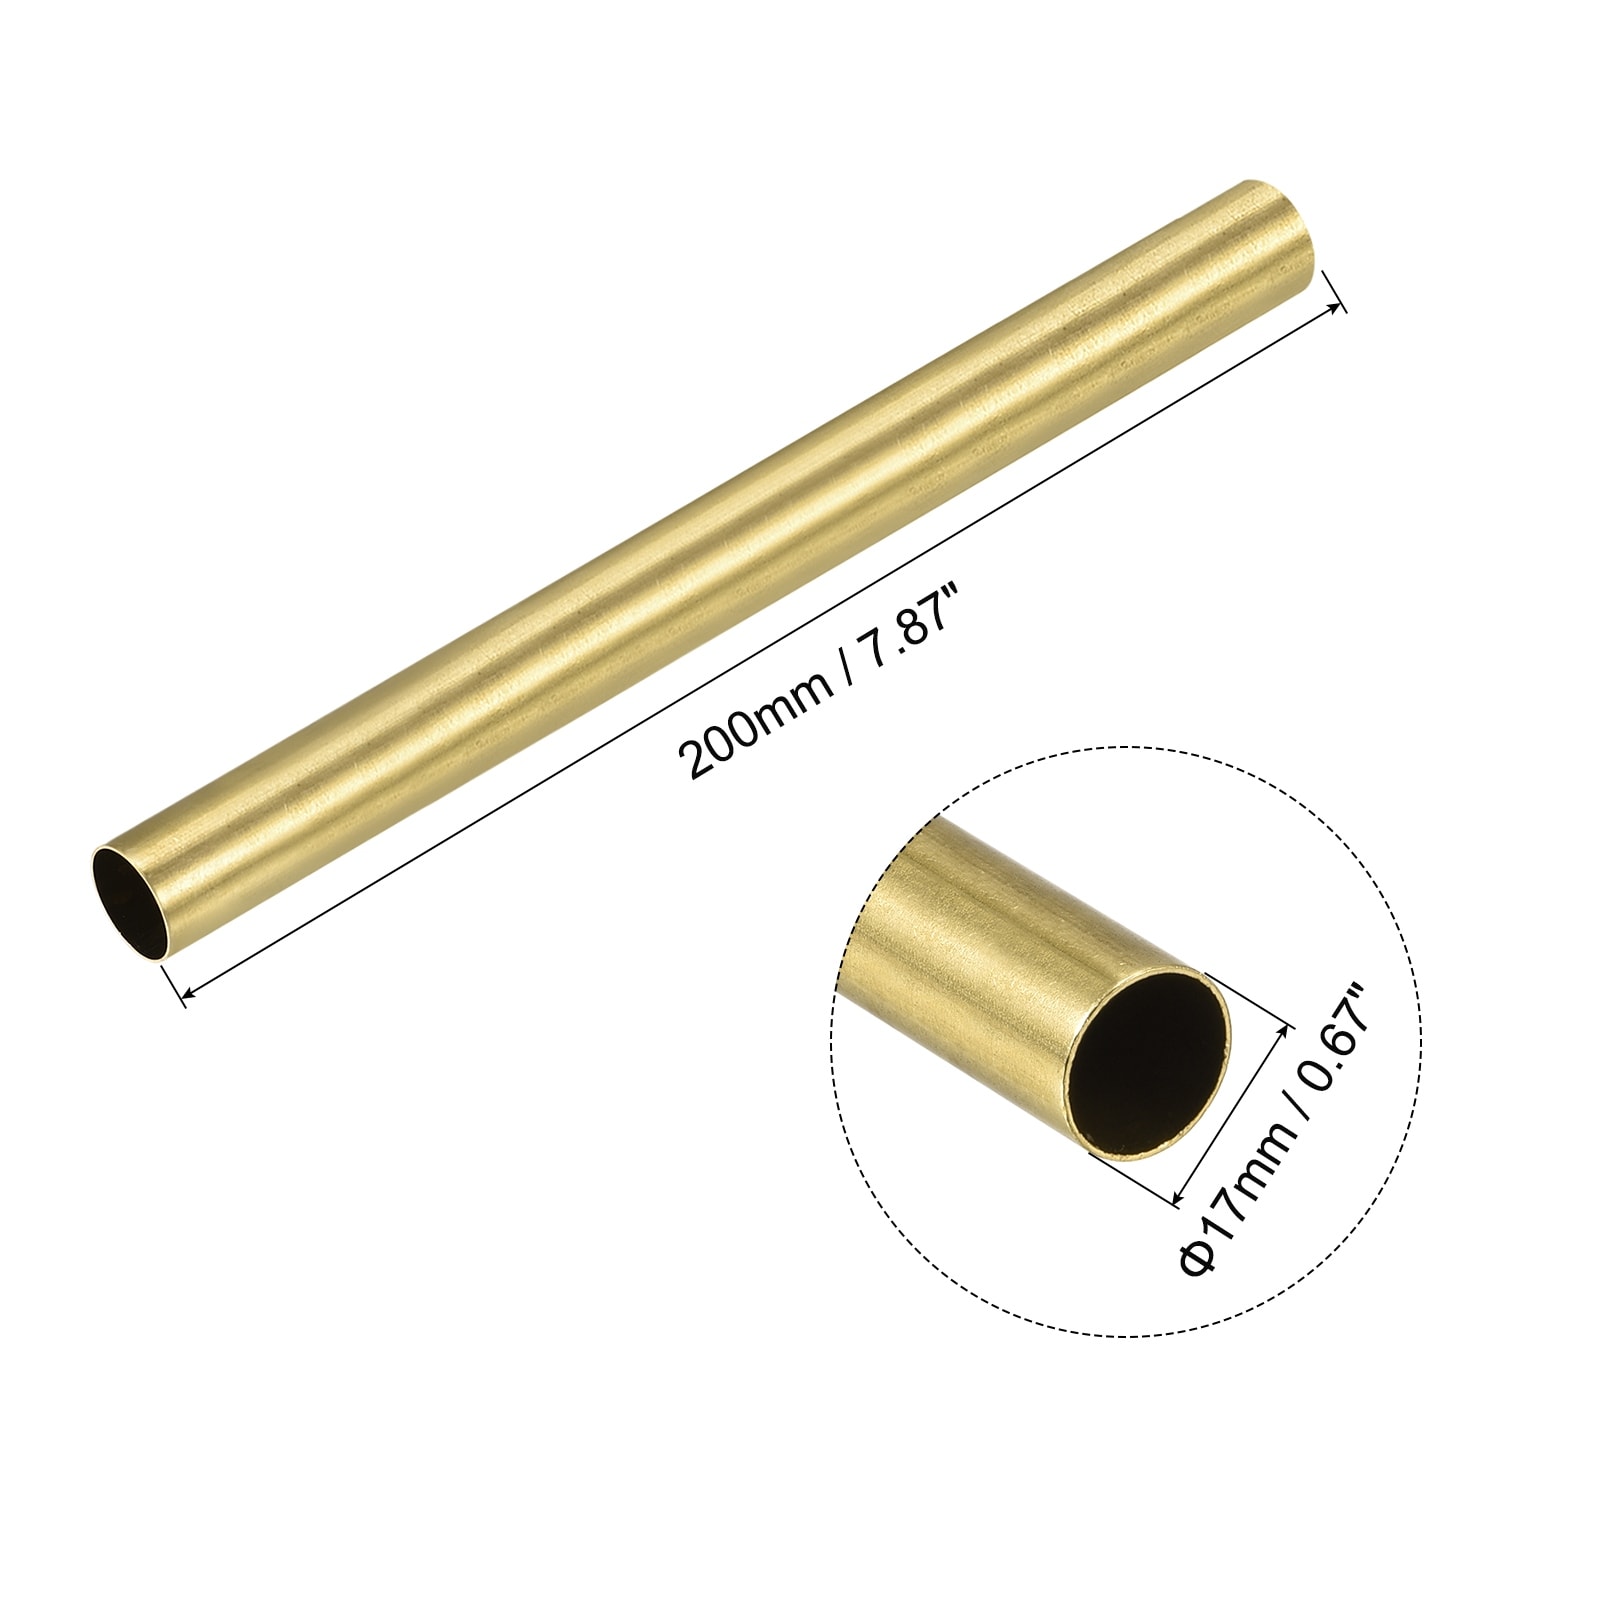 Brass Round Tube 17mm OD 0.5mm Wall Thickness 200mm Length Pipe Tubing -  Brass Tone - Bed Bath & Beyond - 36021068